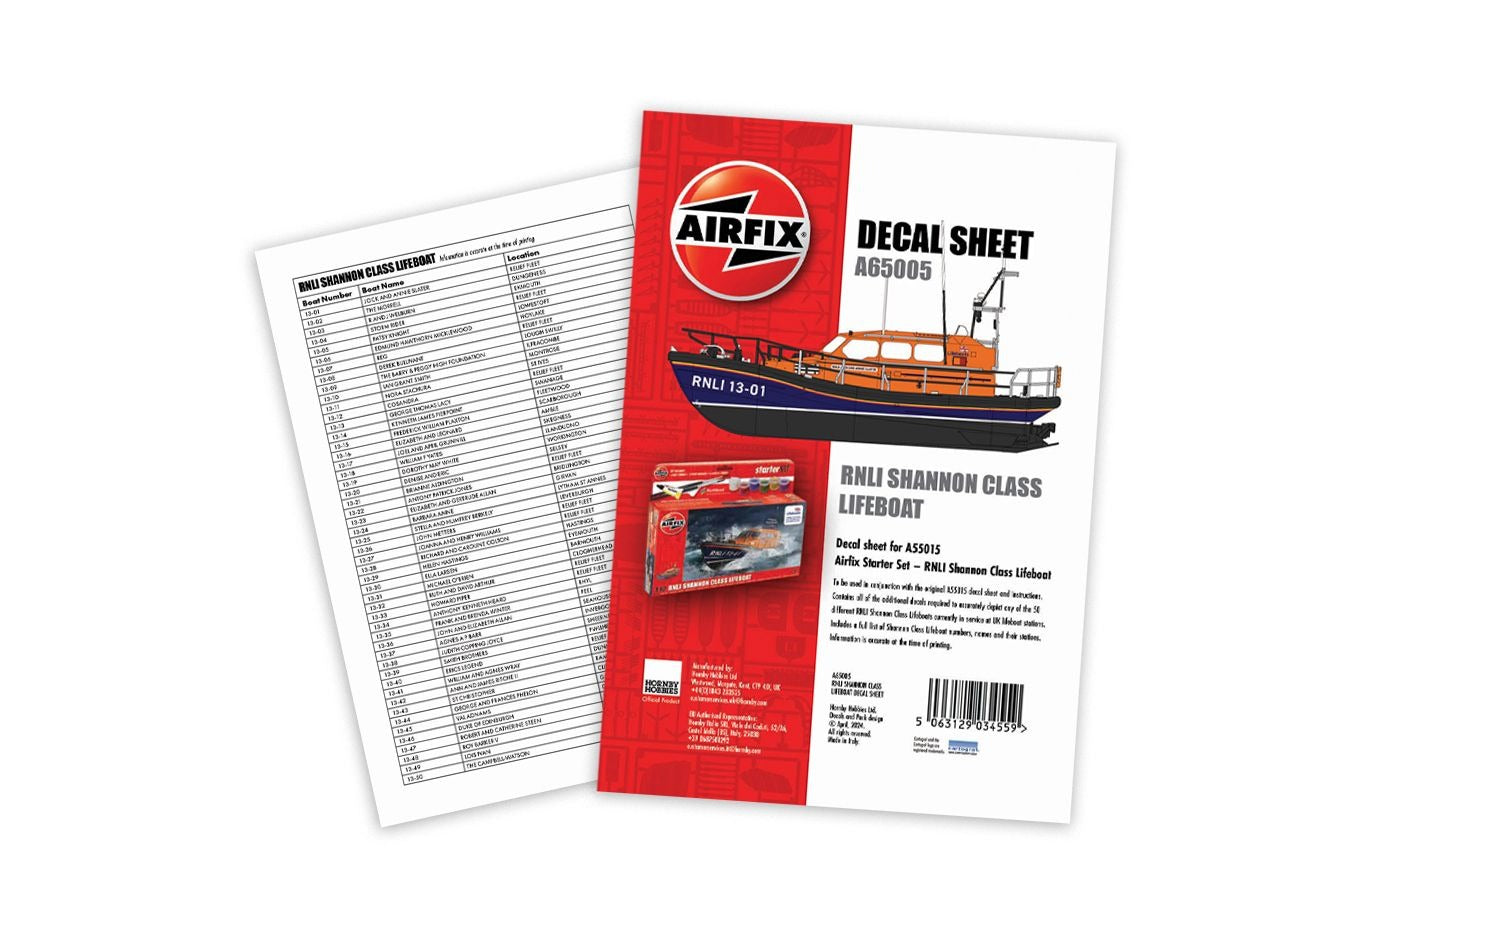 Airfix RNLI Shannon Class Lifeboat Decal Sheet A65005